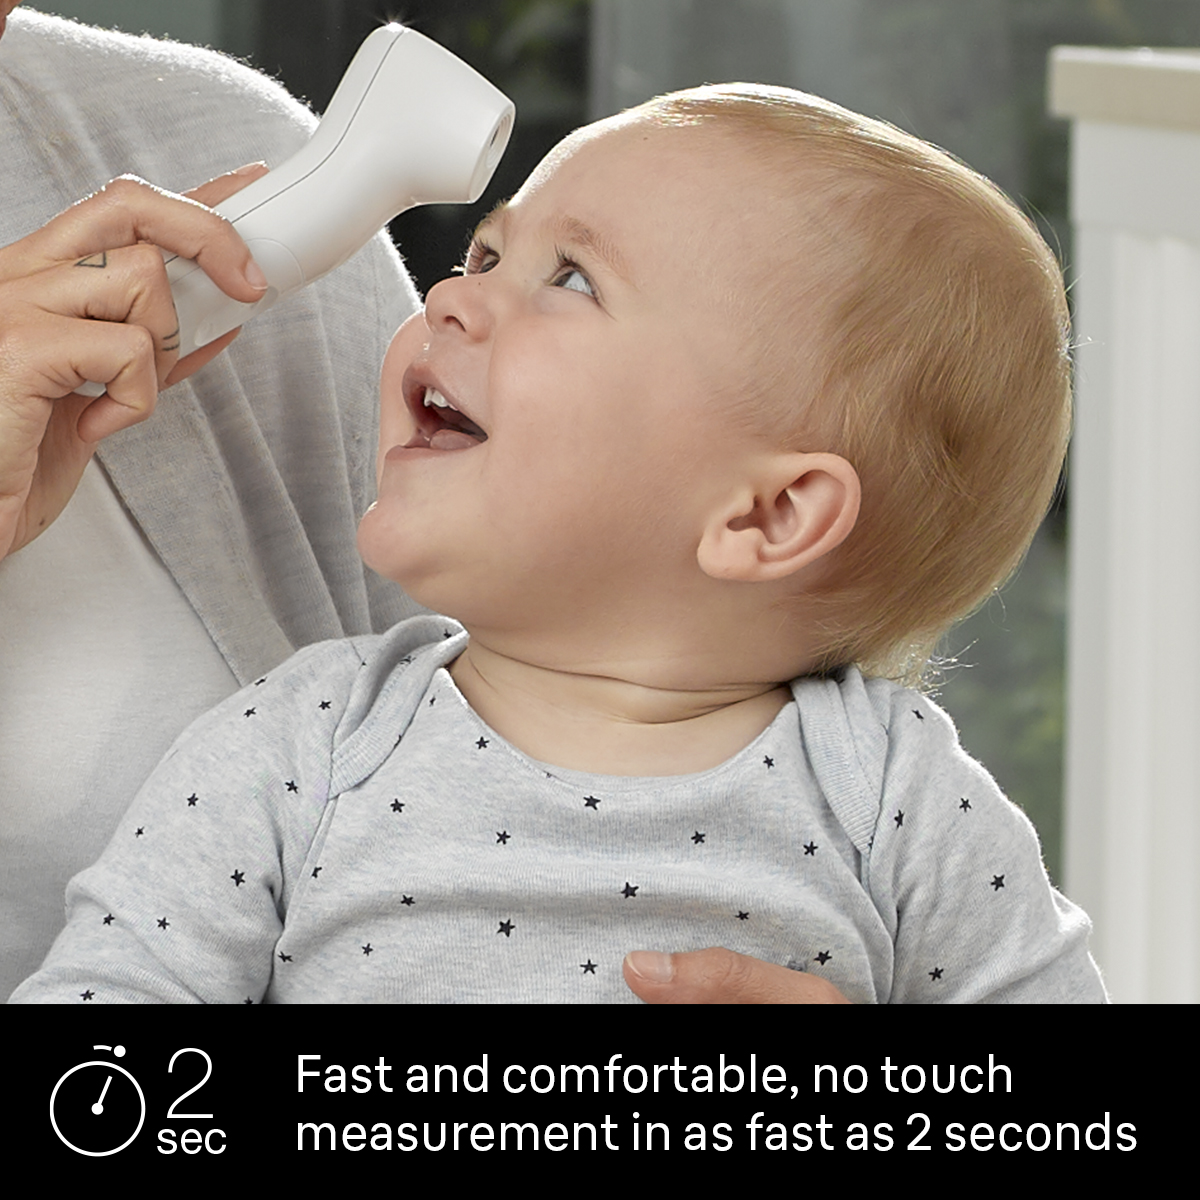 Braun 3-in-1 Digital No Touch Thermometer, Suitable for All Ages, BNT100US, White - image 4 of 10